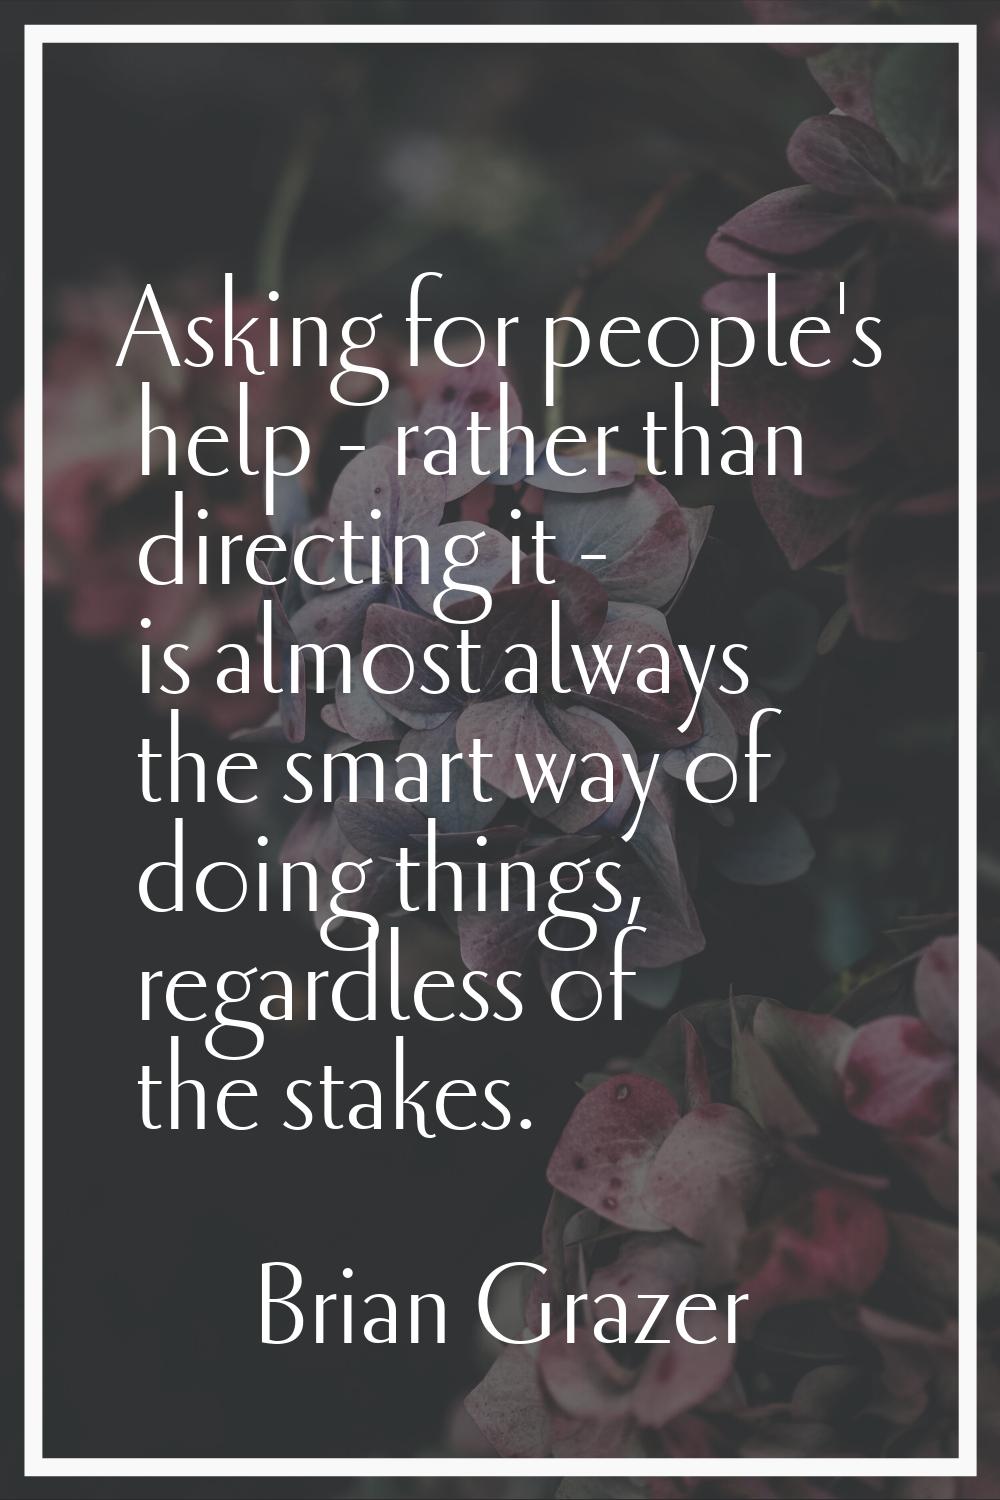 Asking for people's help - rather than directing it - is almost always the smart way of doing thing